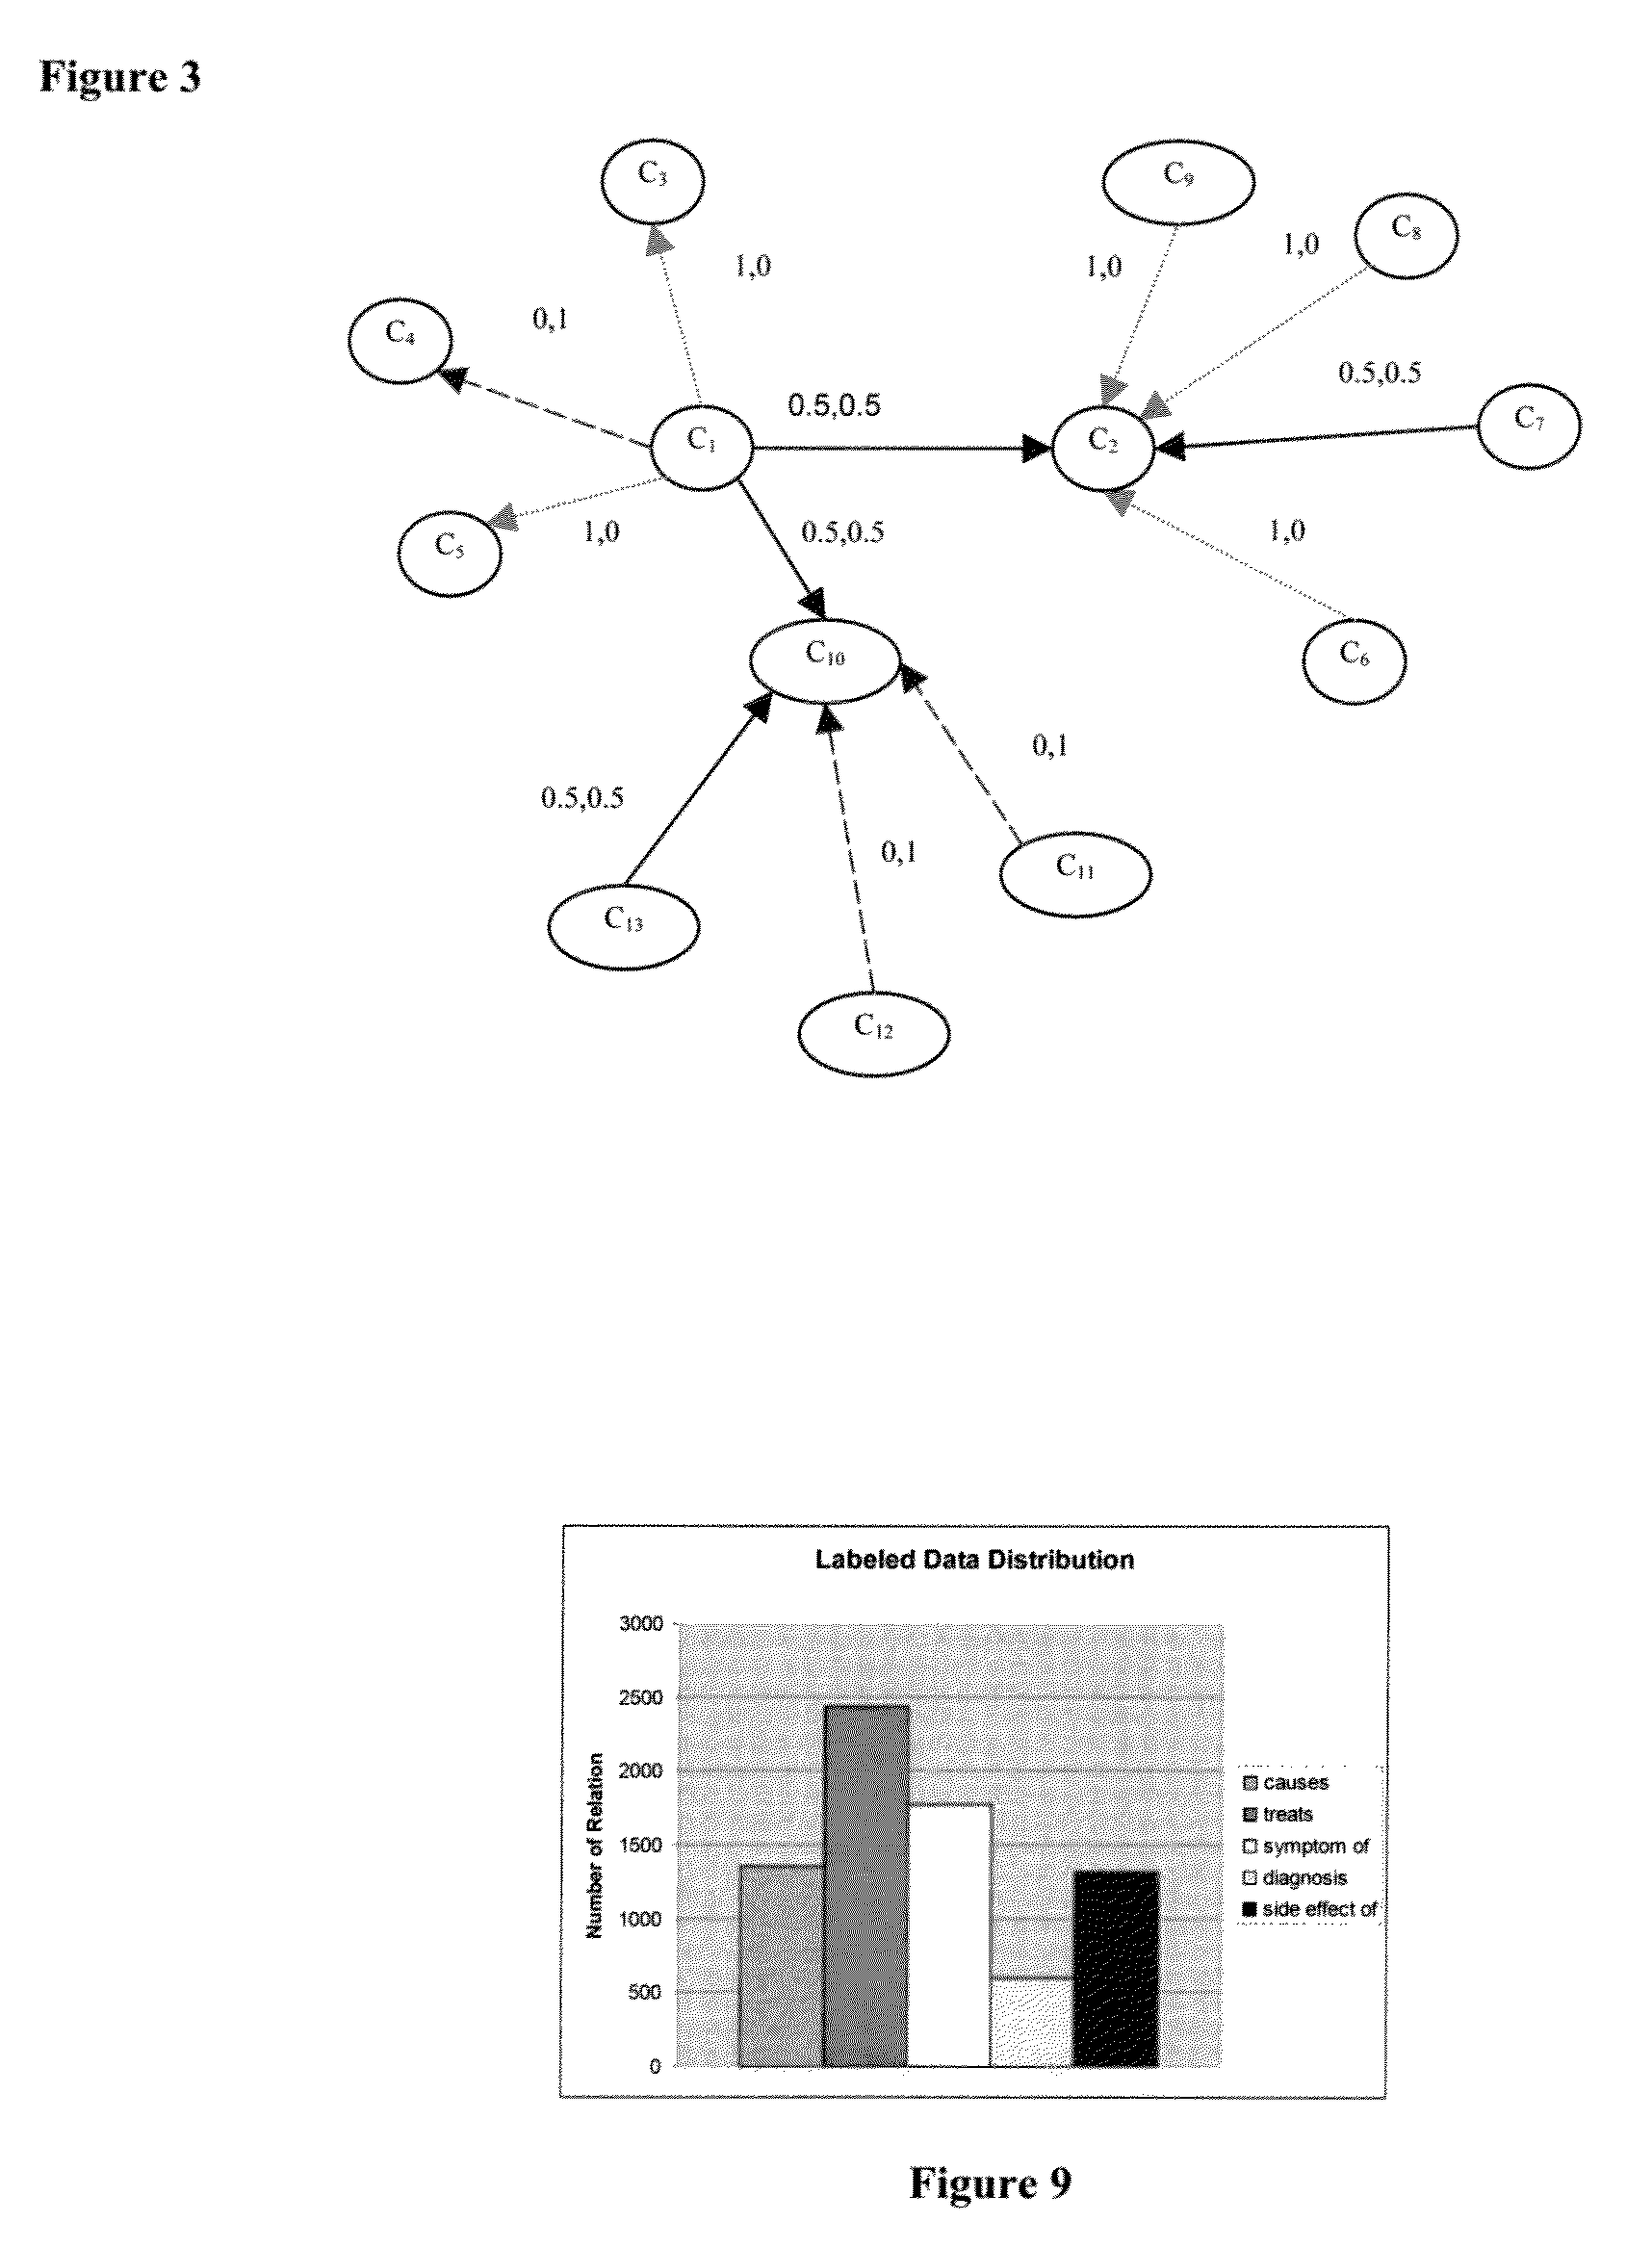 System and method for creating and searching medical ontologies